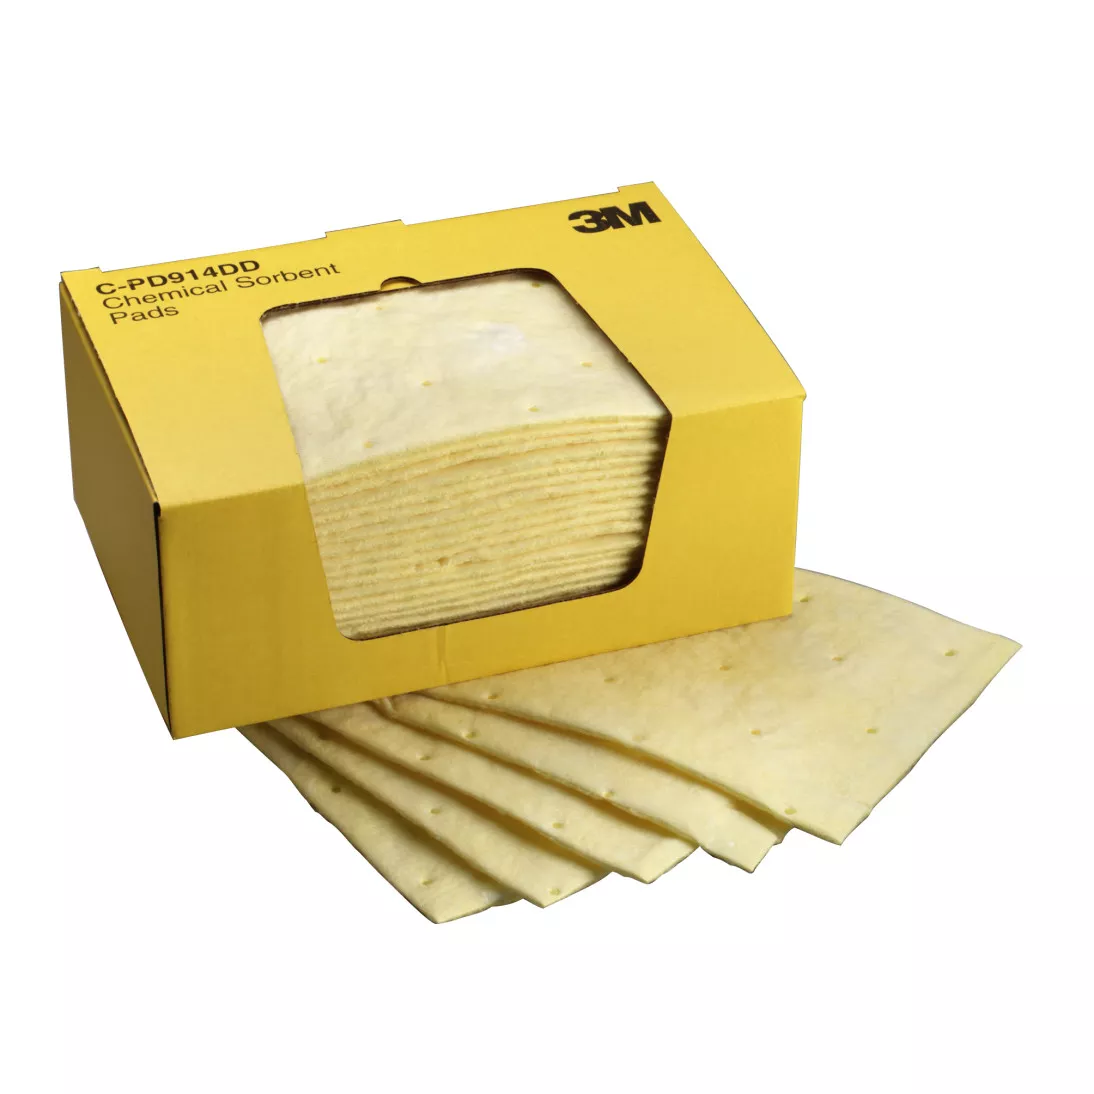 3M™ Chemical Sorbent Pad C-PD914DD, High Capacity, 9 in x 14 in, 25
Pads/Box, 6 Box/Case